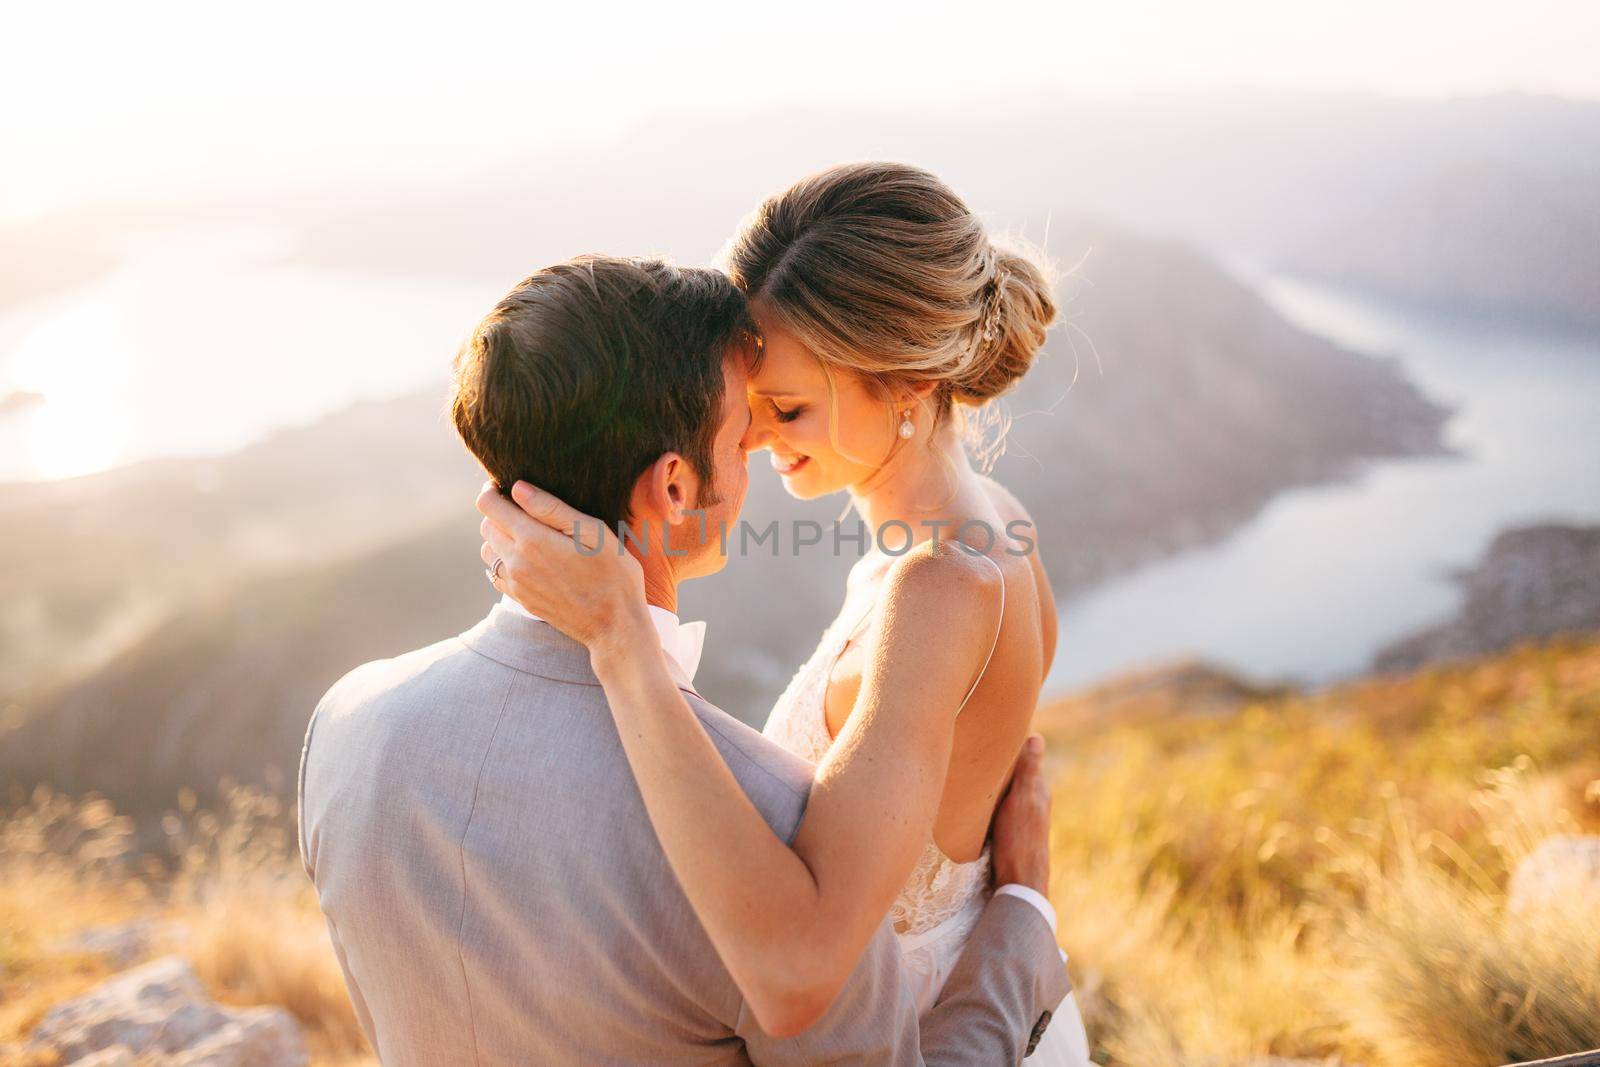 The bride and groom sitting on the top of Mount Lovcen overlooking the Bay of Kotor, smiling and hugging tenderly, close-up by Nadtochiy